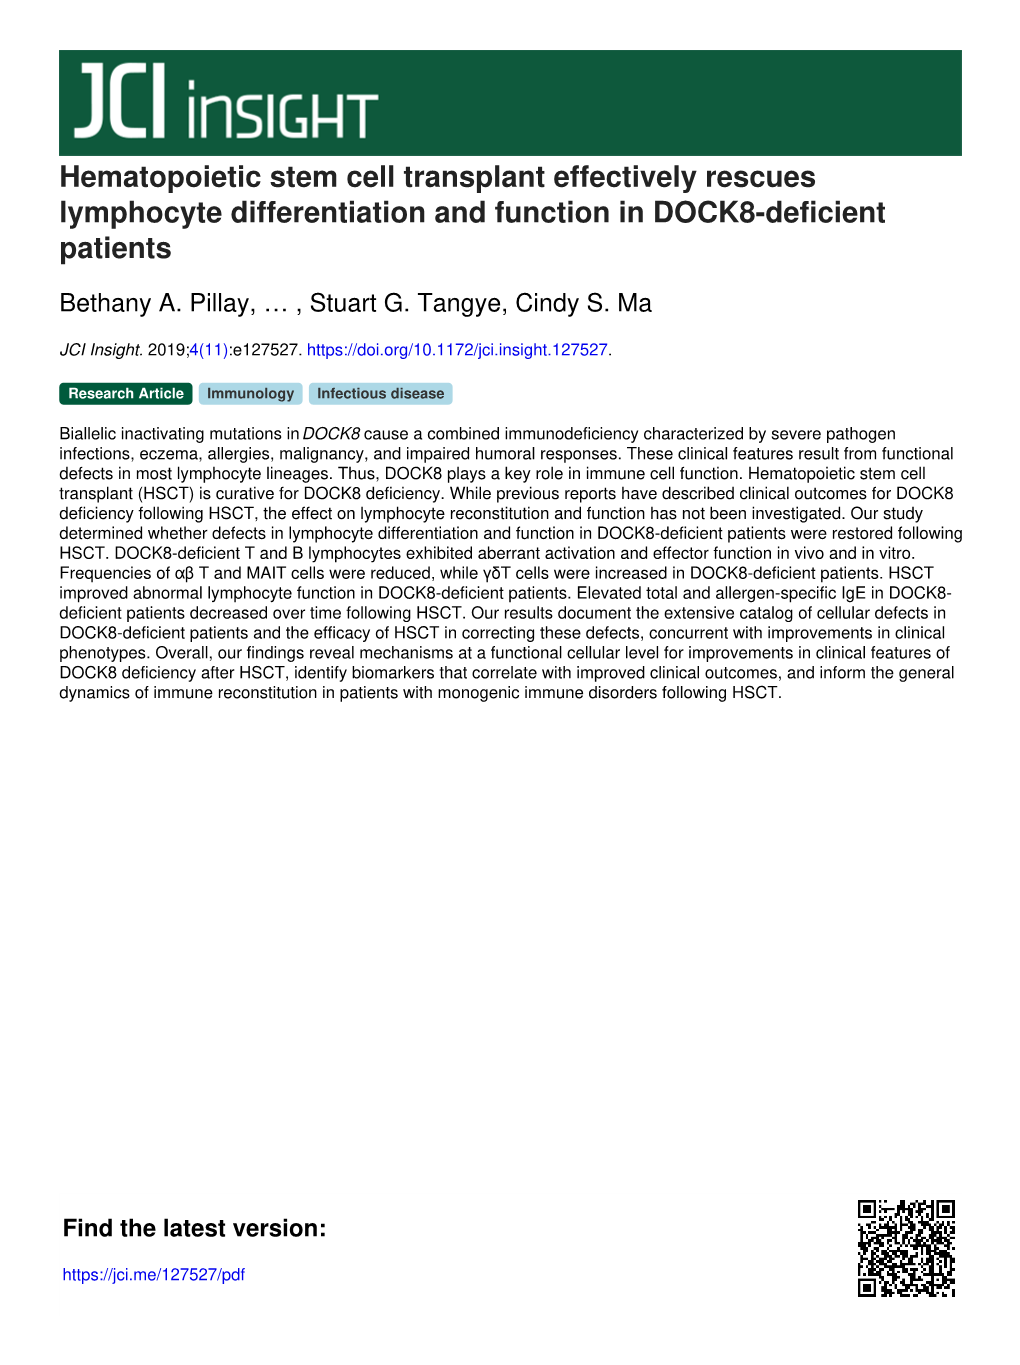 Hematopoietic Stem Cell Transplant Effectively Rescues Lymphocyte Differentiation and Function in DOCK8-Deficient Patients